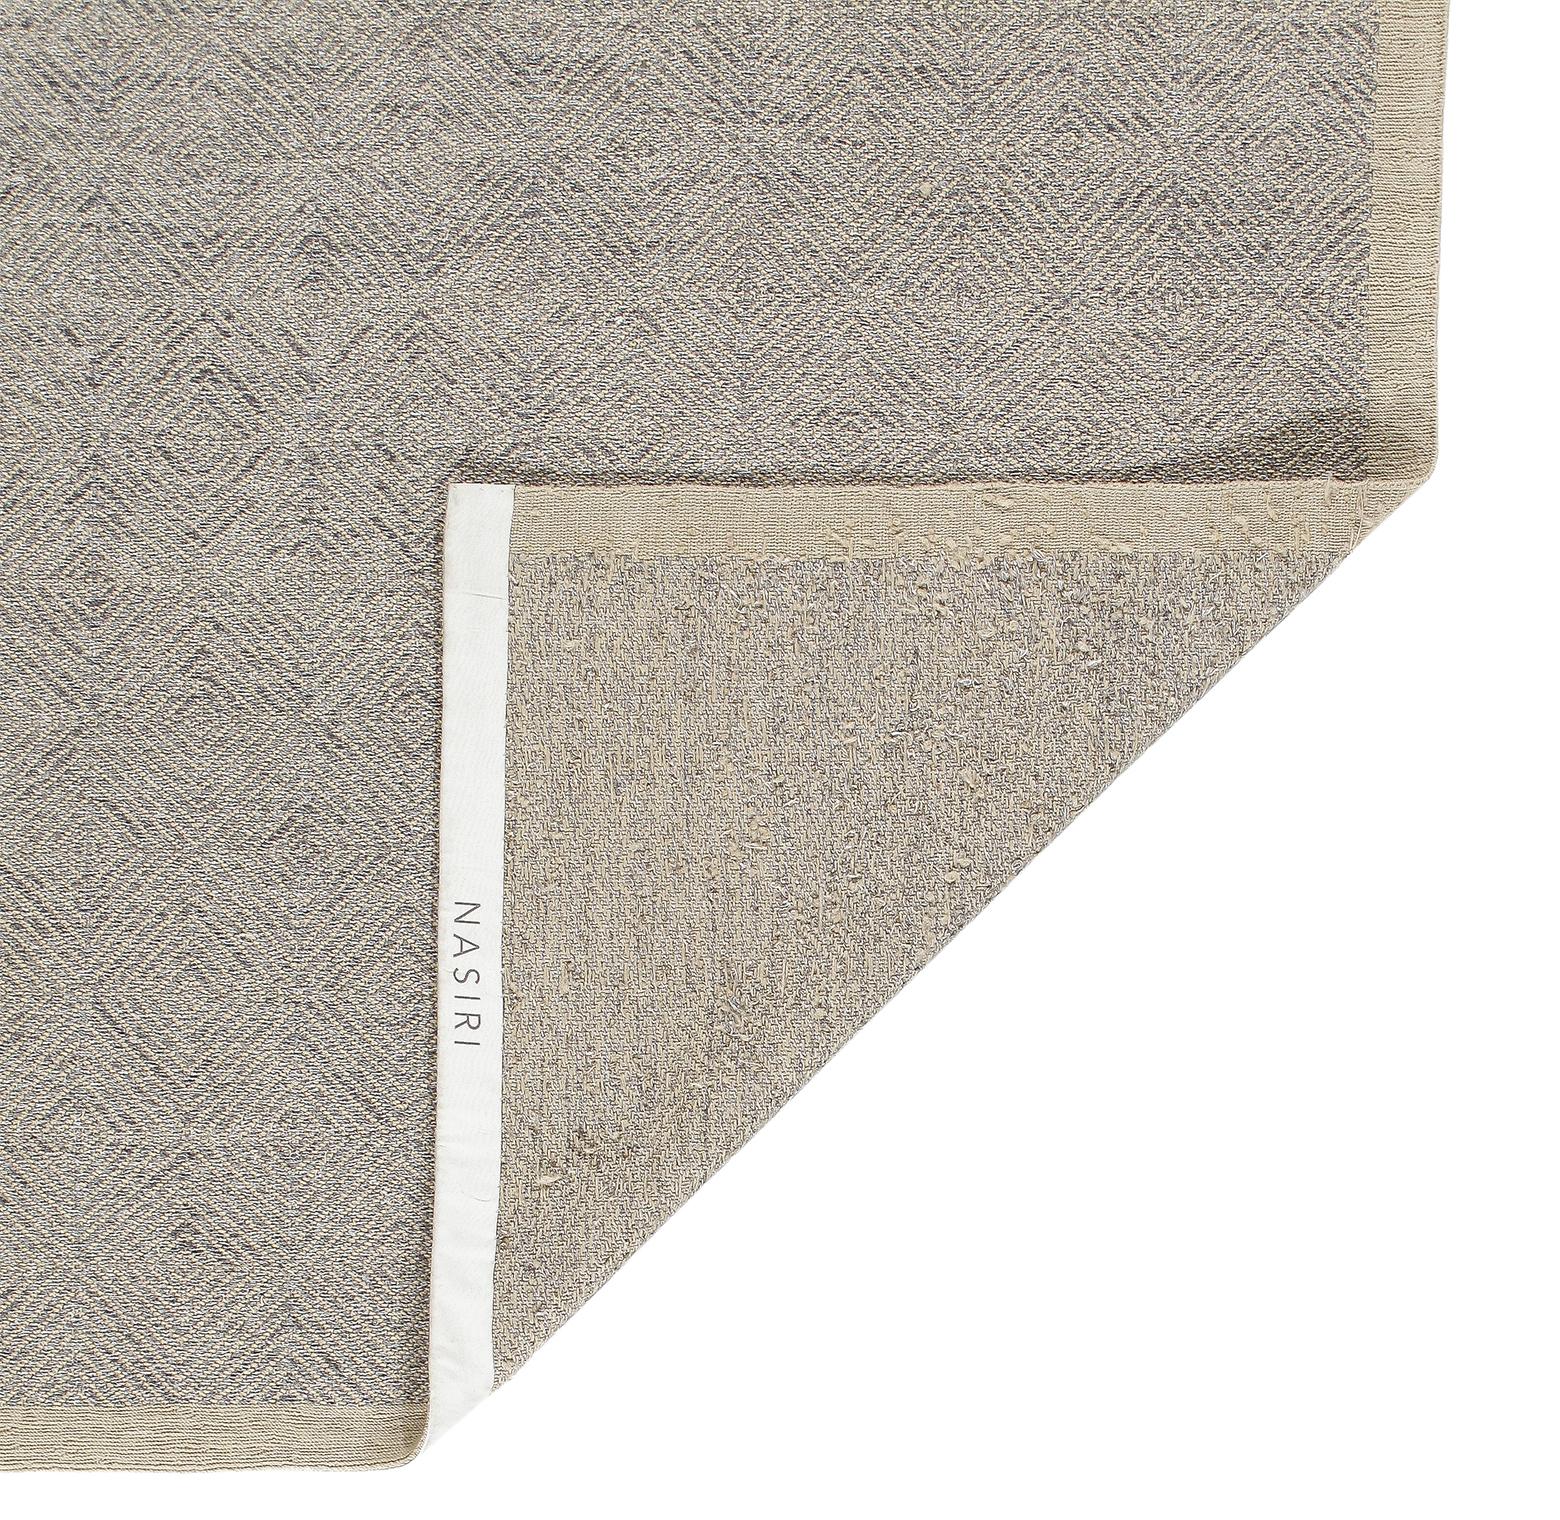 Modern Sumak Flatweave Rug in Beige and Grey Tones In New Condition For Sale In New York, NY